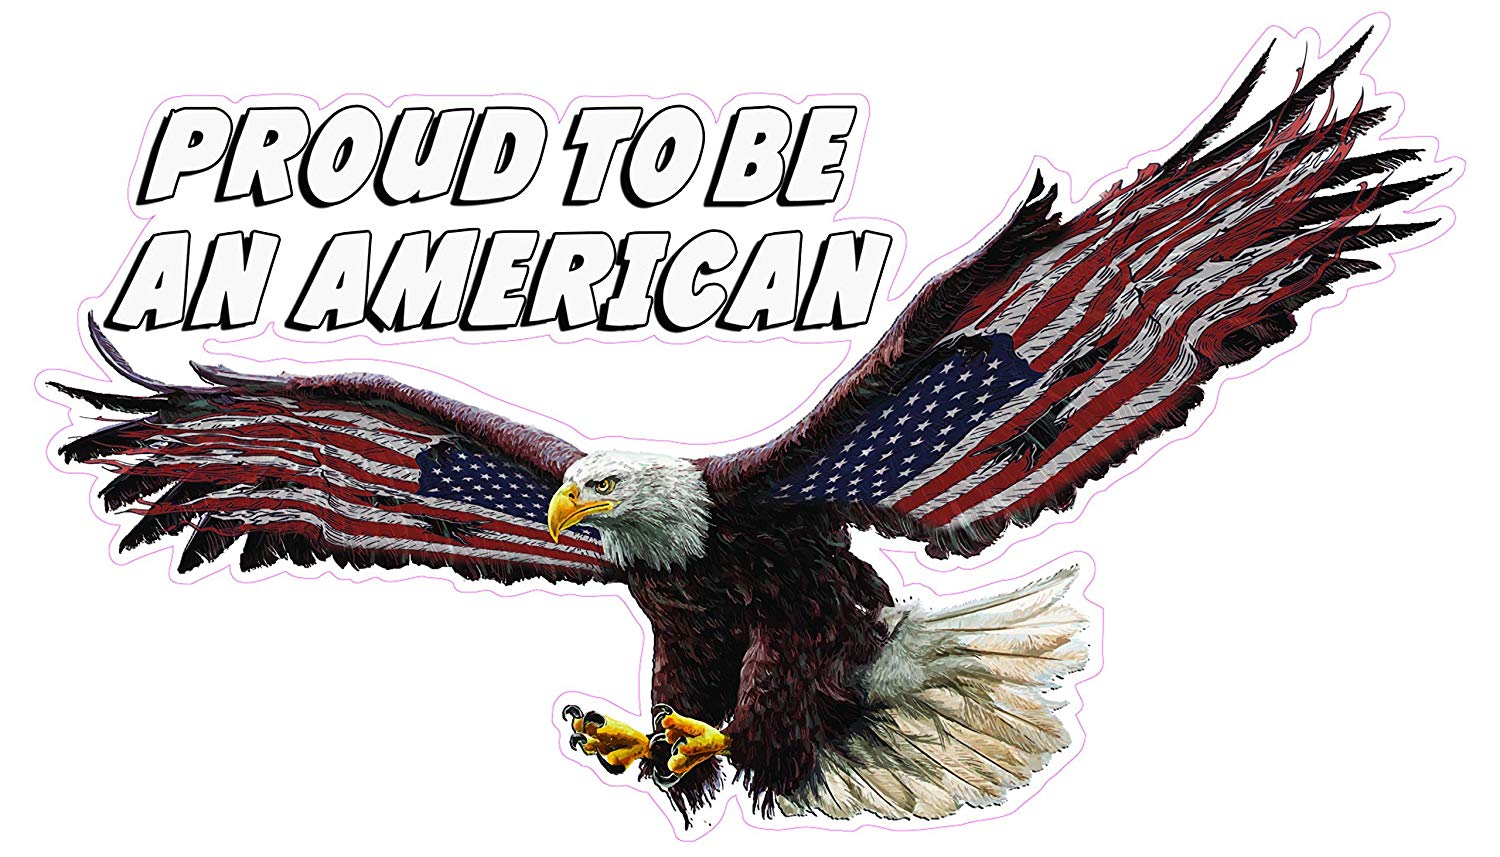 Proud To Be An American White Lettering Decal - American Bald Eagle, American bald eagle decal, American eagle, American Eagle American Flag Decal, American flag, American flag decals, American flag eagle decals, American flag stickers, automotive decals, automotive stickers, decals, eagle decals, eagle flag, eagle stickers, Military decals, military stickers, patriot eagle, Patriotic stickers, Proud to Be an American decal, proud to be an american sticker, vehicle decals, Vehicle stickers, wind